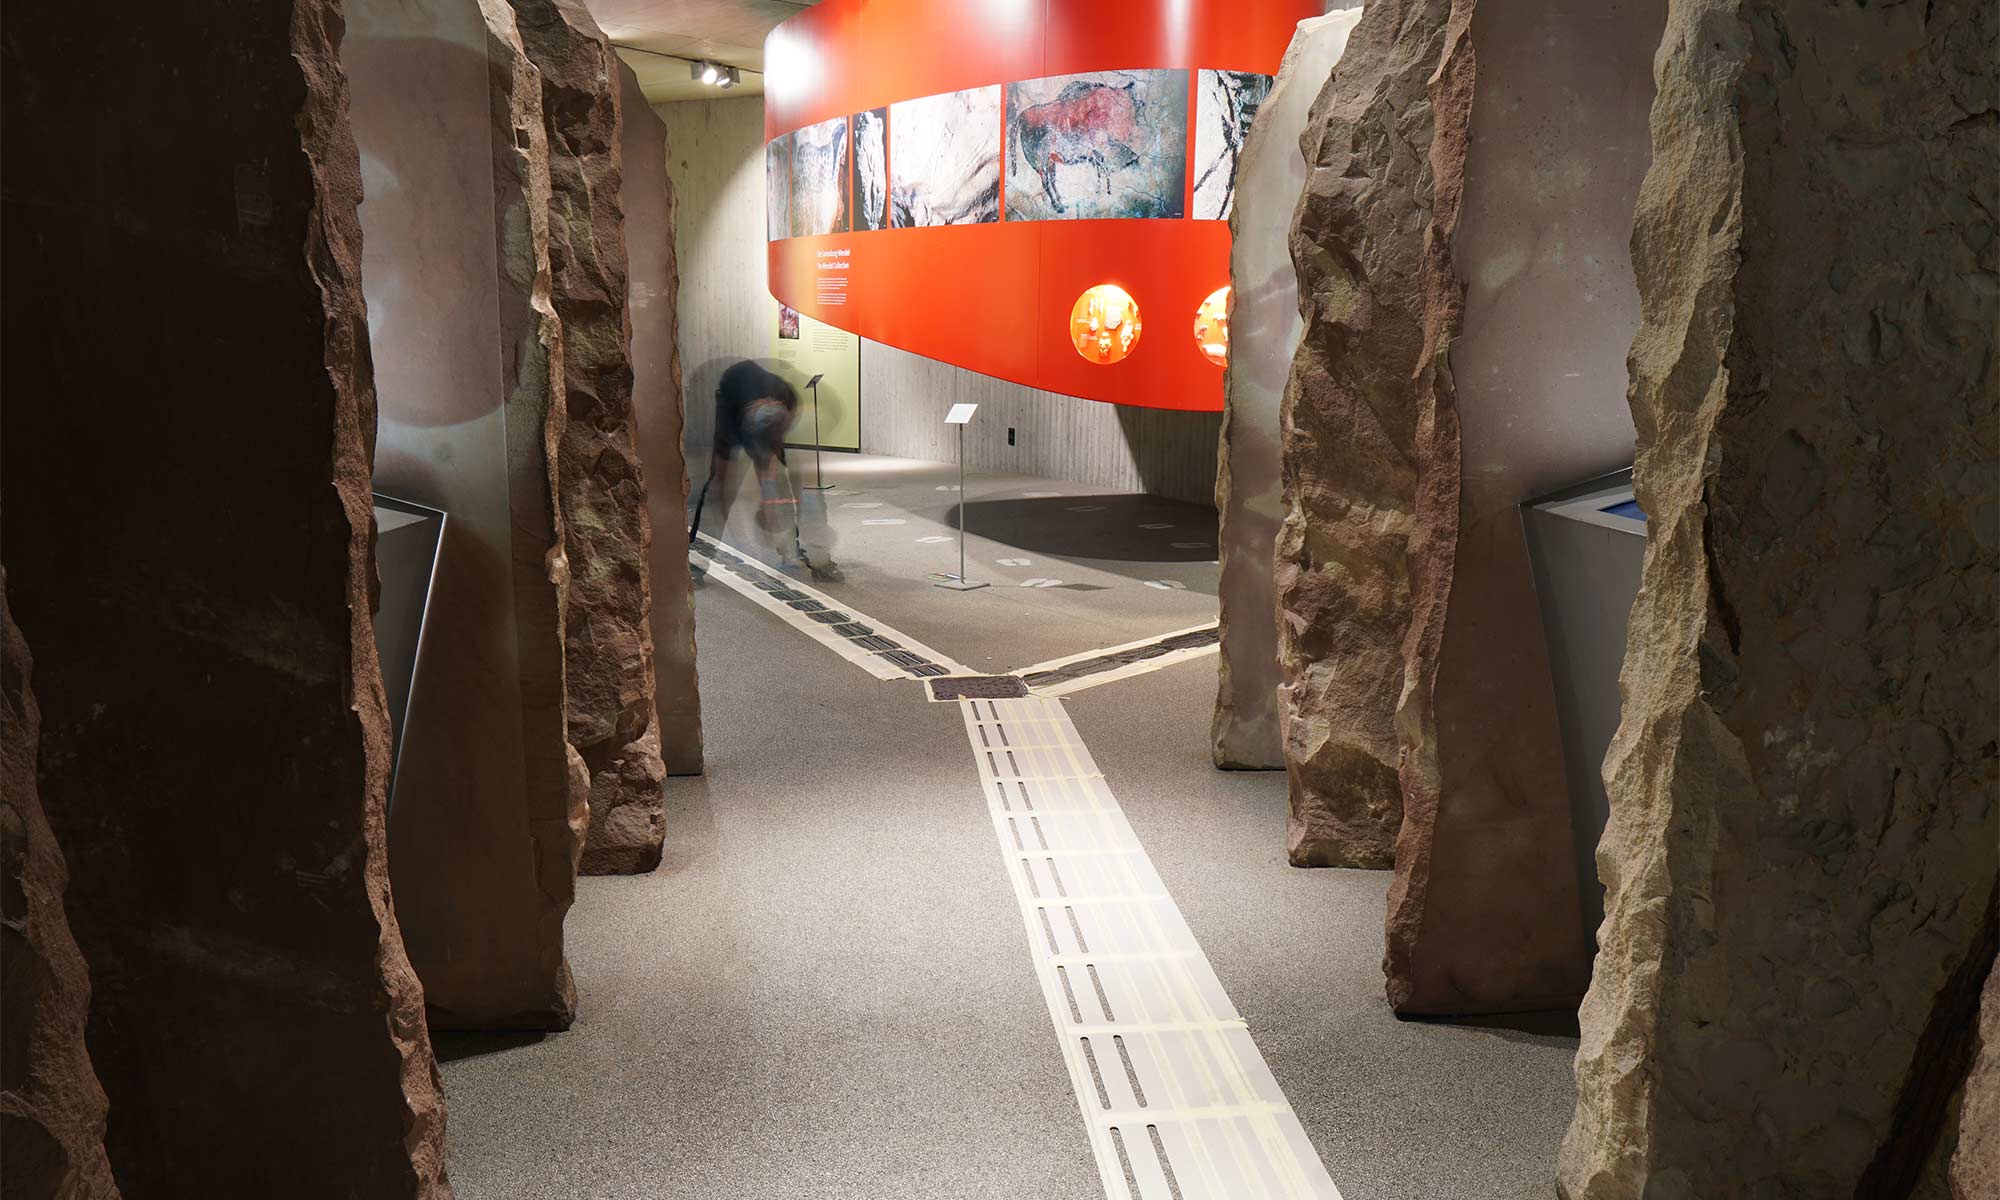 The picture shows the process of laying the floor indicators in the Neanderthal Museum. On the sides of the picture, you can see partitions that have been set up to look like rocks. A path runs straight through the picture and branches to the left and right at one point. The indicators are still taped off. In the back of the picture, you can see an installer bending down and pouring black resin onto the masked surfaces.